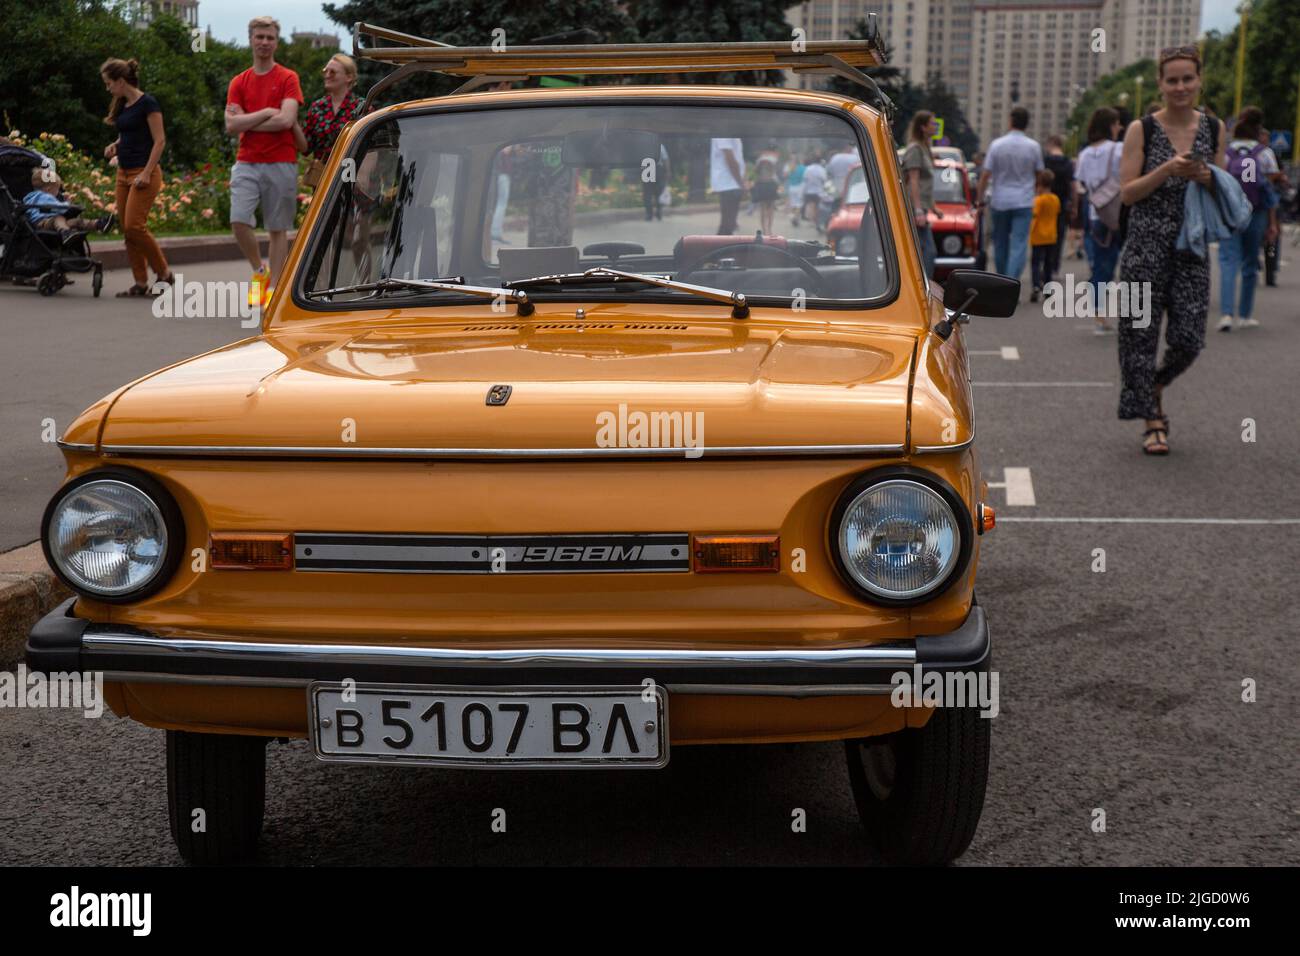 Moscow, Russia. 9th of July, 2022. Soviet series of rear-wheel-drive superminis car Zaporozhets ZAZ-968M is on display during a classic car festival on Moscow's Sparrow Hills on Moscow Transport Day, Russia. Nikolay Vinokurov/Alamy Live News Stock Photo